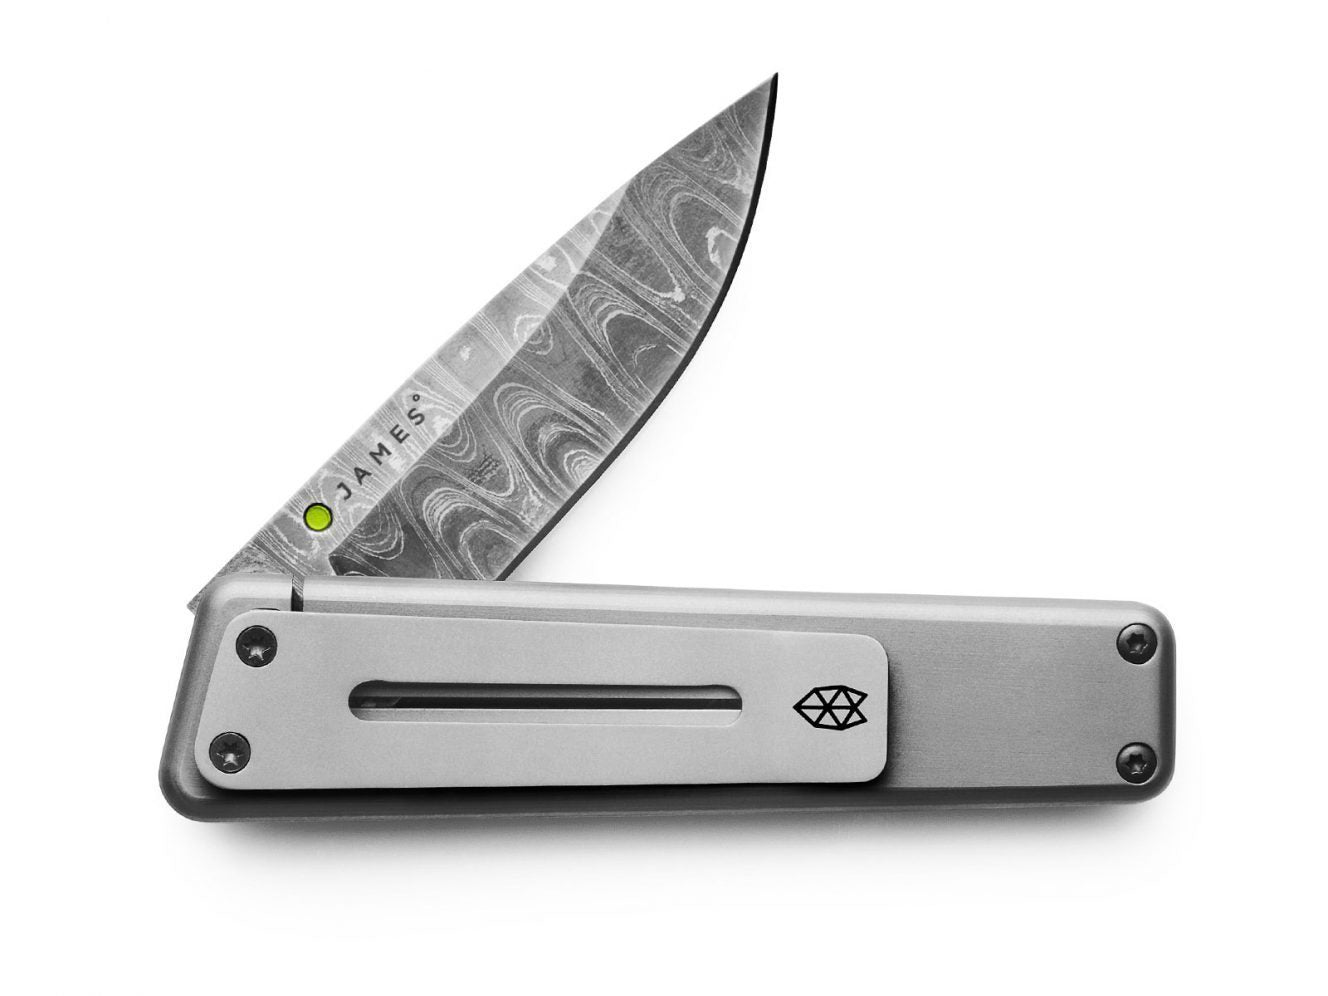 The Chapter knife with titanium handle and decorative stainless steel blade.